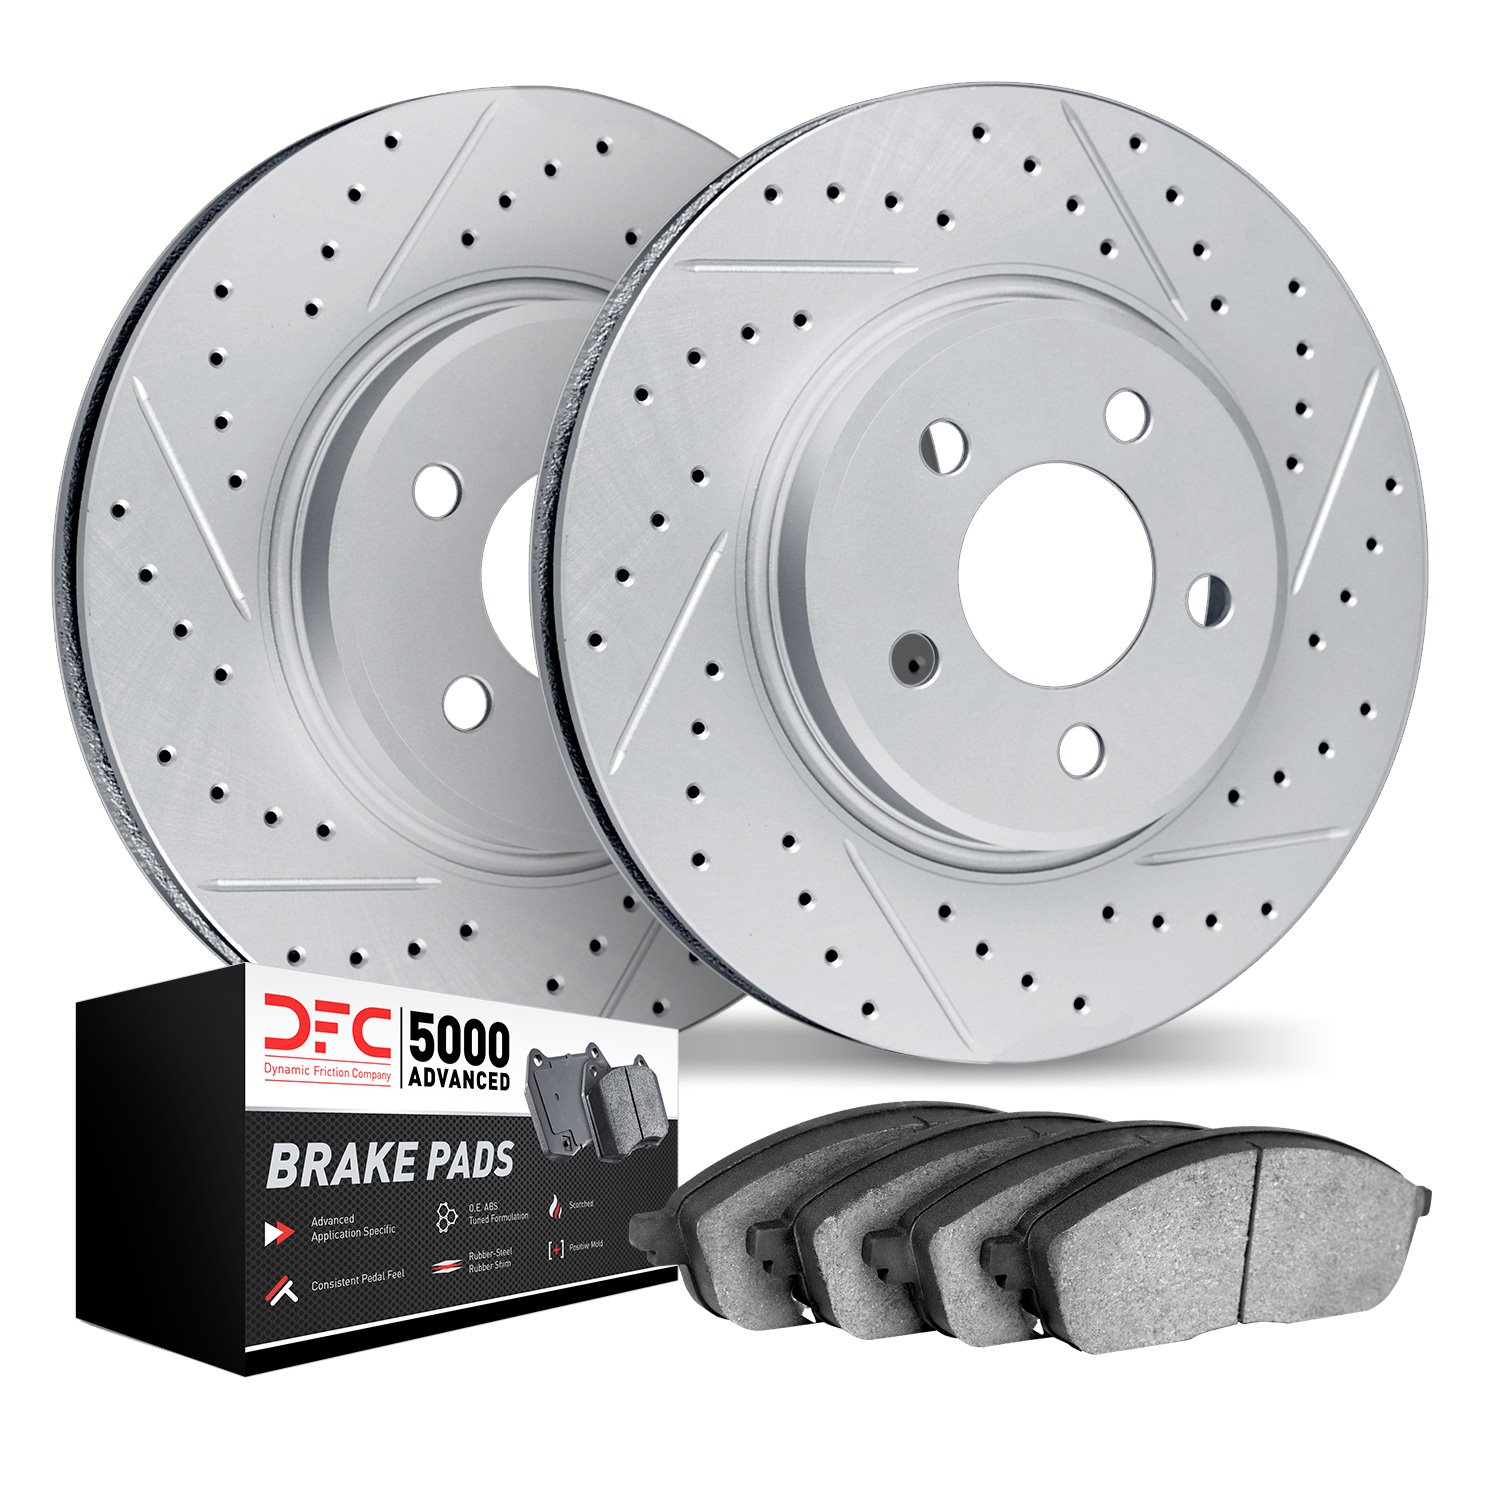 2502-63013 Geoperformance Drilled/Slotted Rotors w/5000 Advanced Brake Pads Kit, 1990-1998 Mercedes-Benz, Position: Front